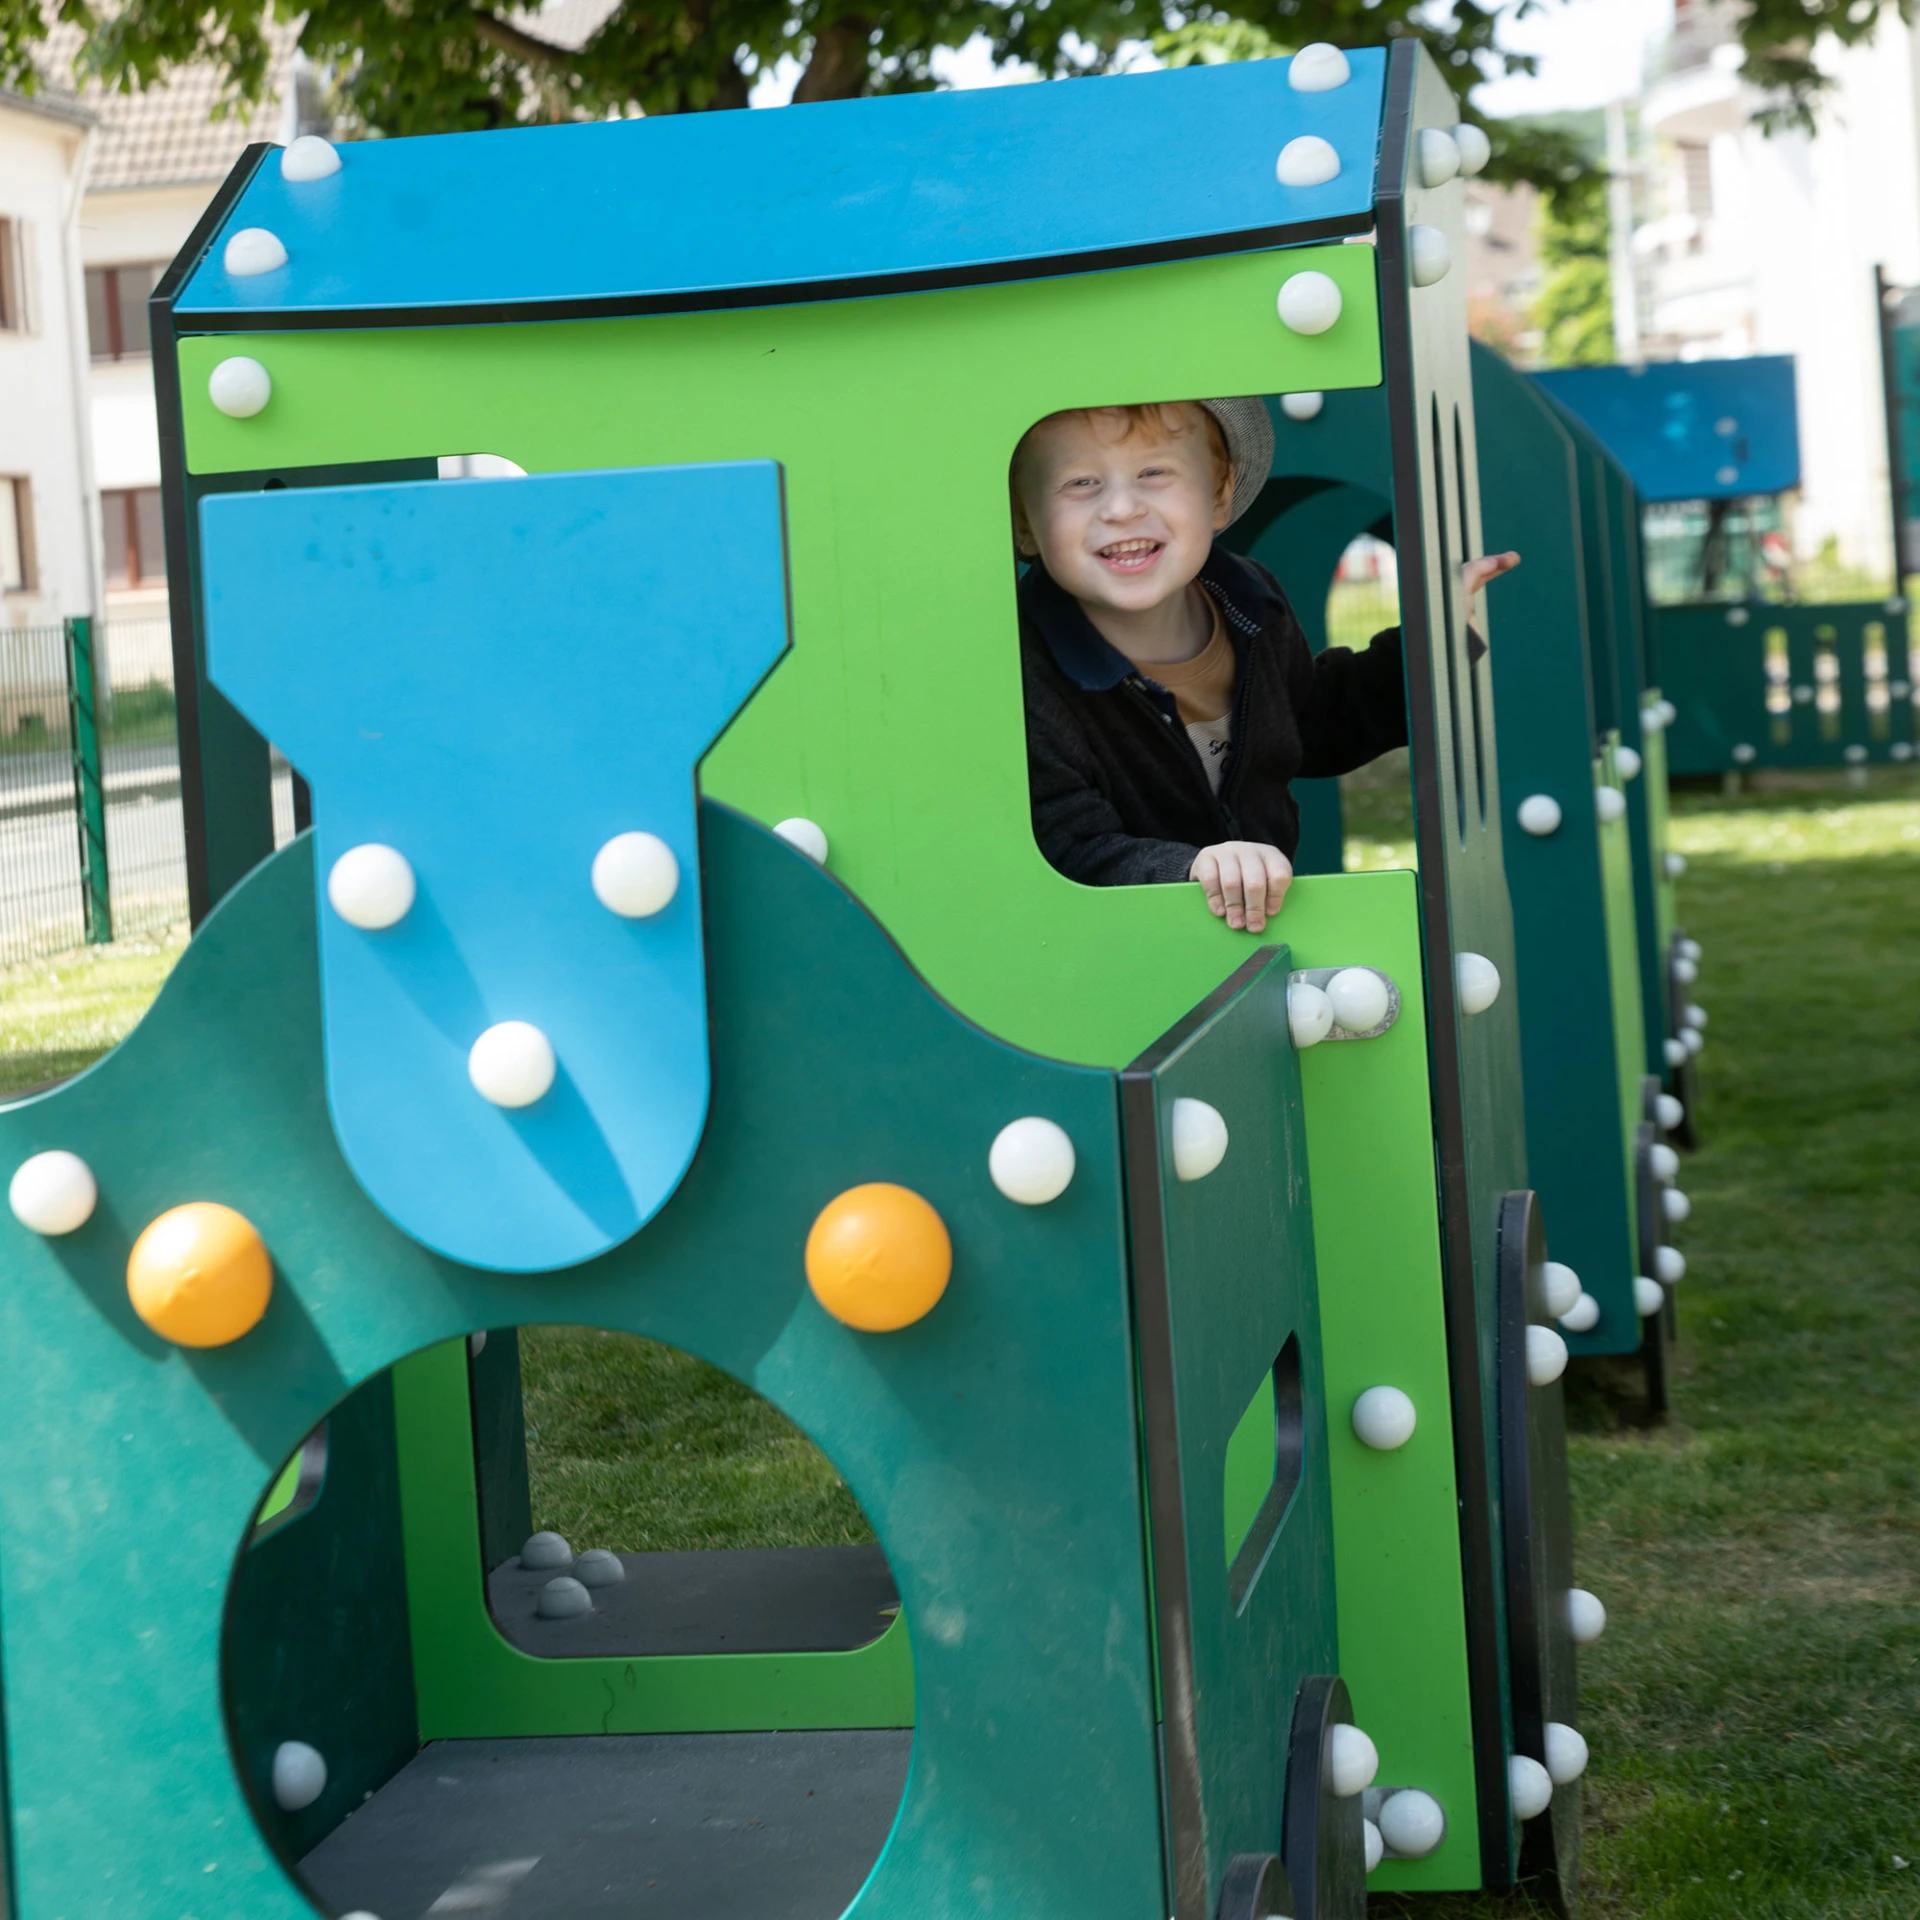 A child playing on a sustainably made train play structure